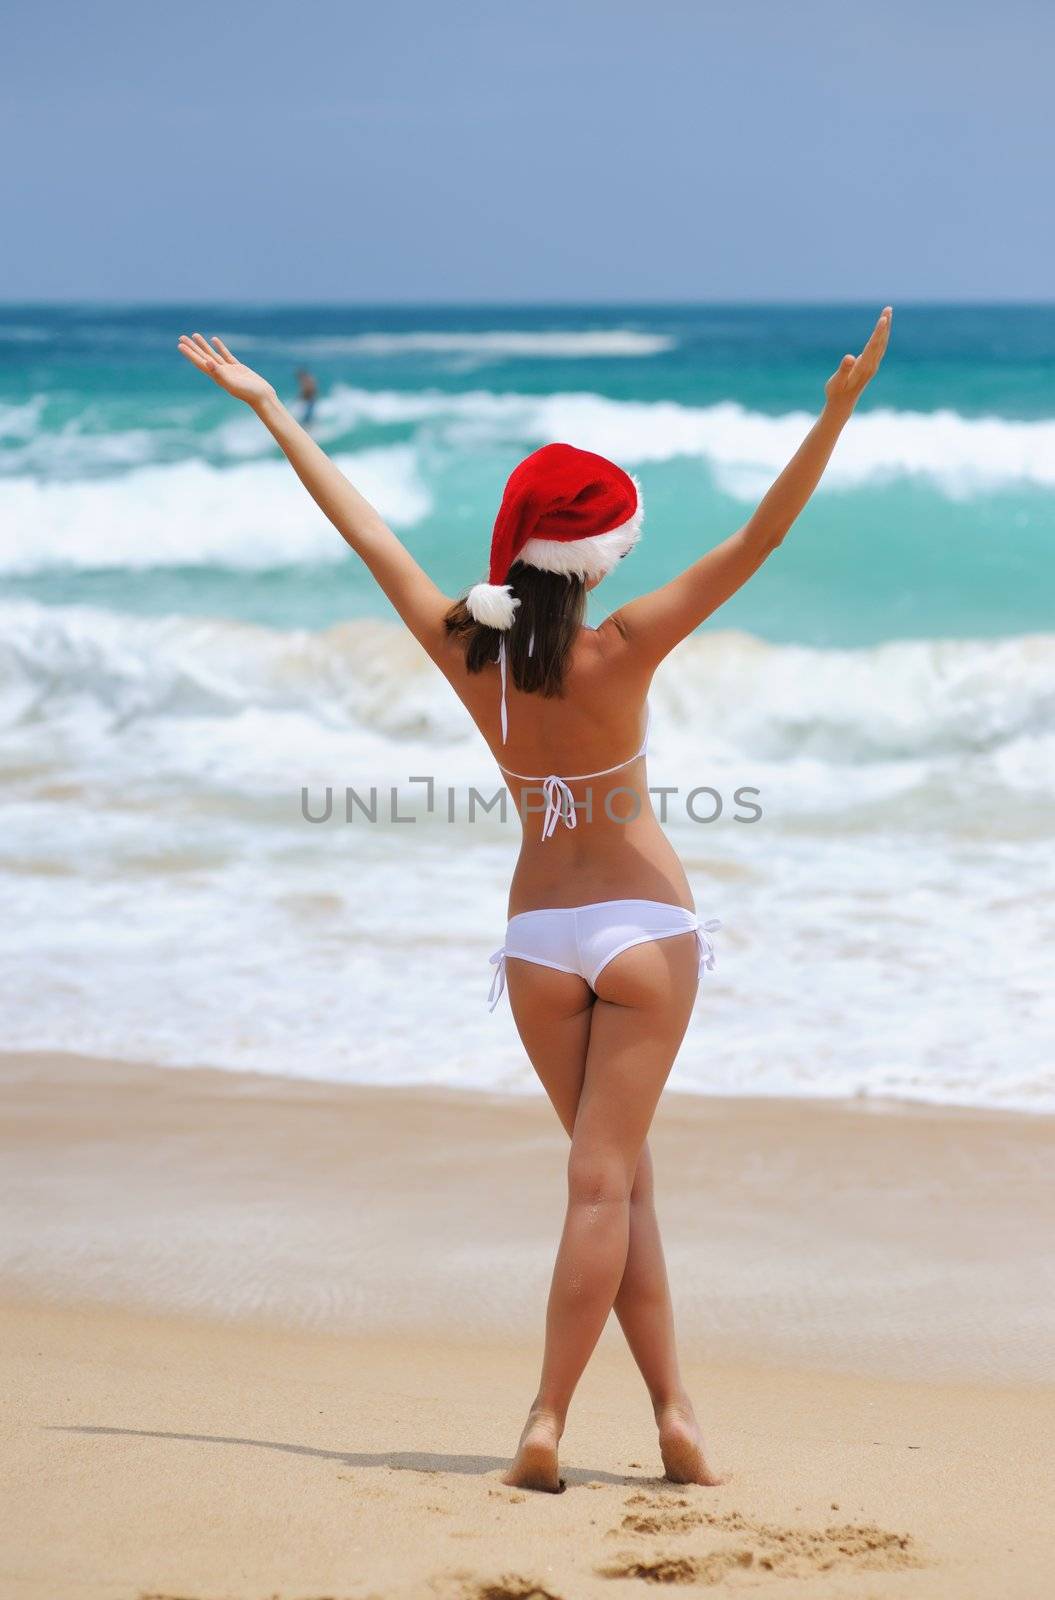 Woman on the beach in santa's hat